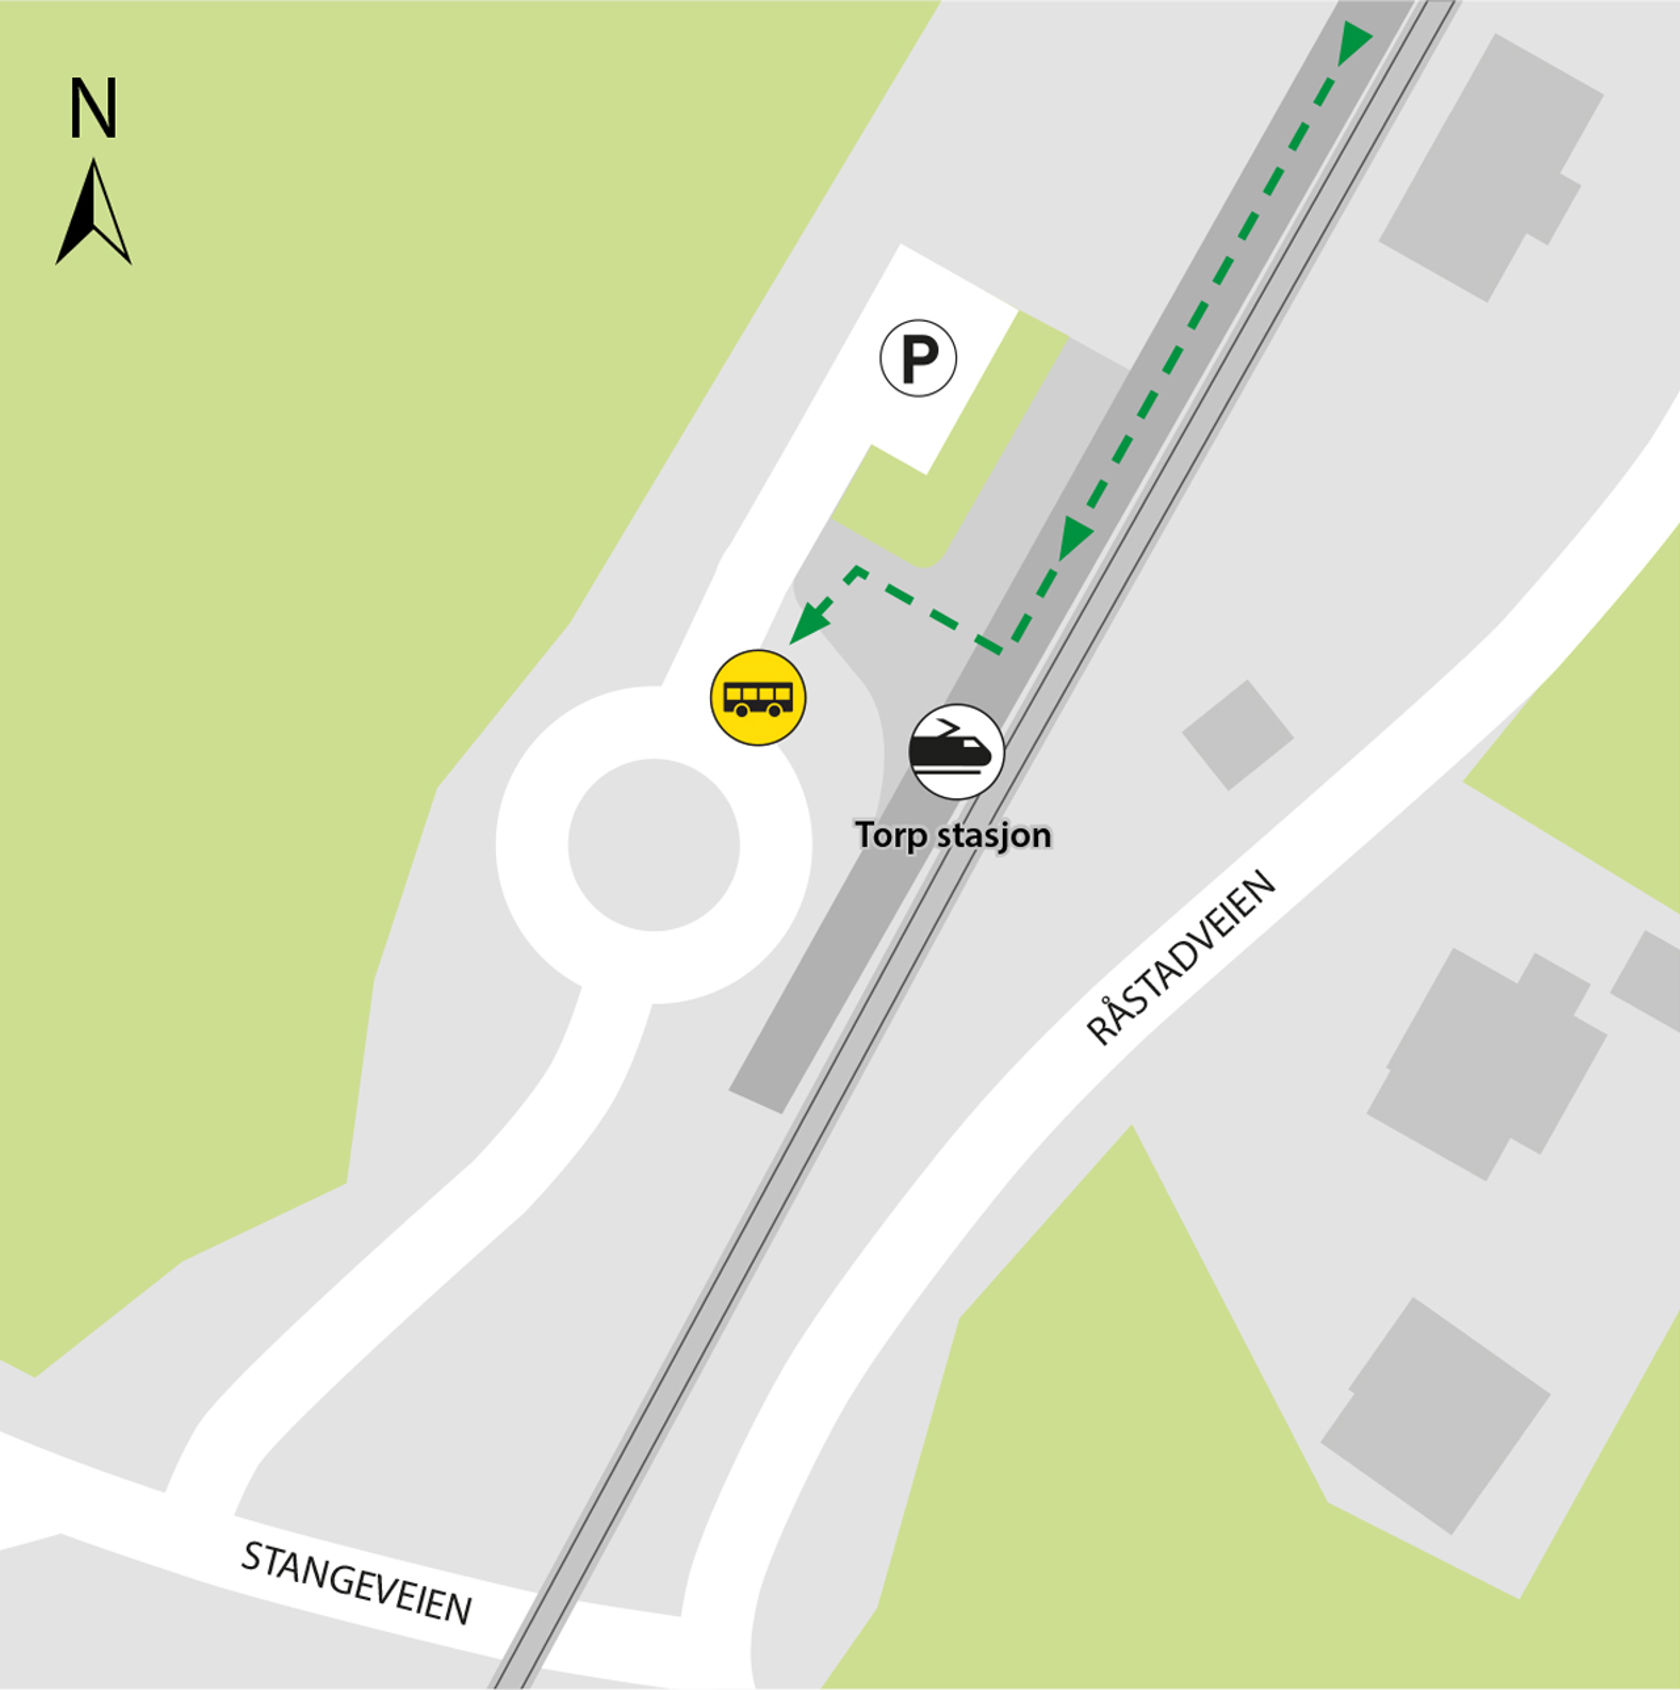 Use the shuttle bus to Torp Airport to transfer to bus for train.